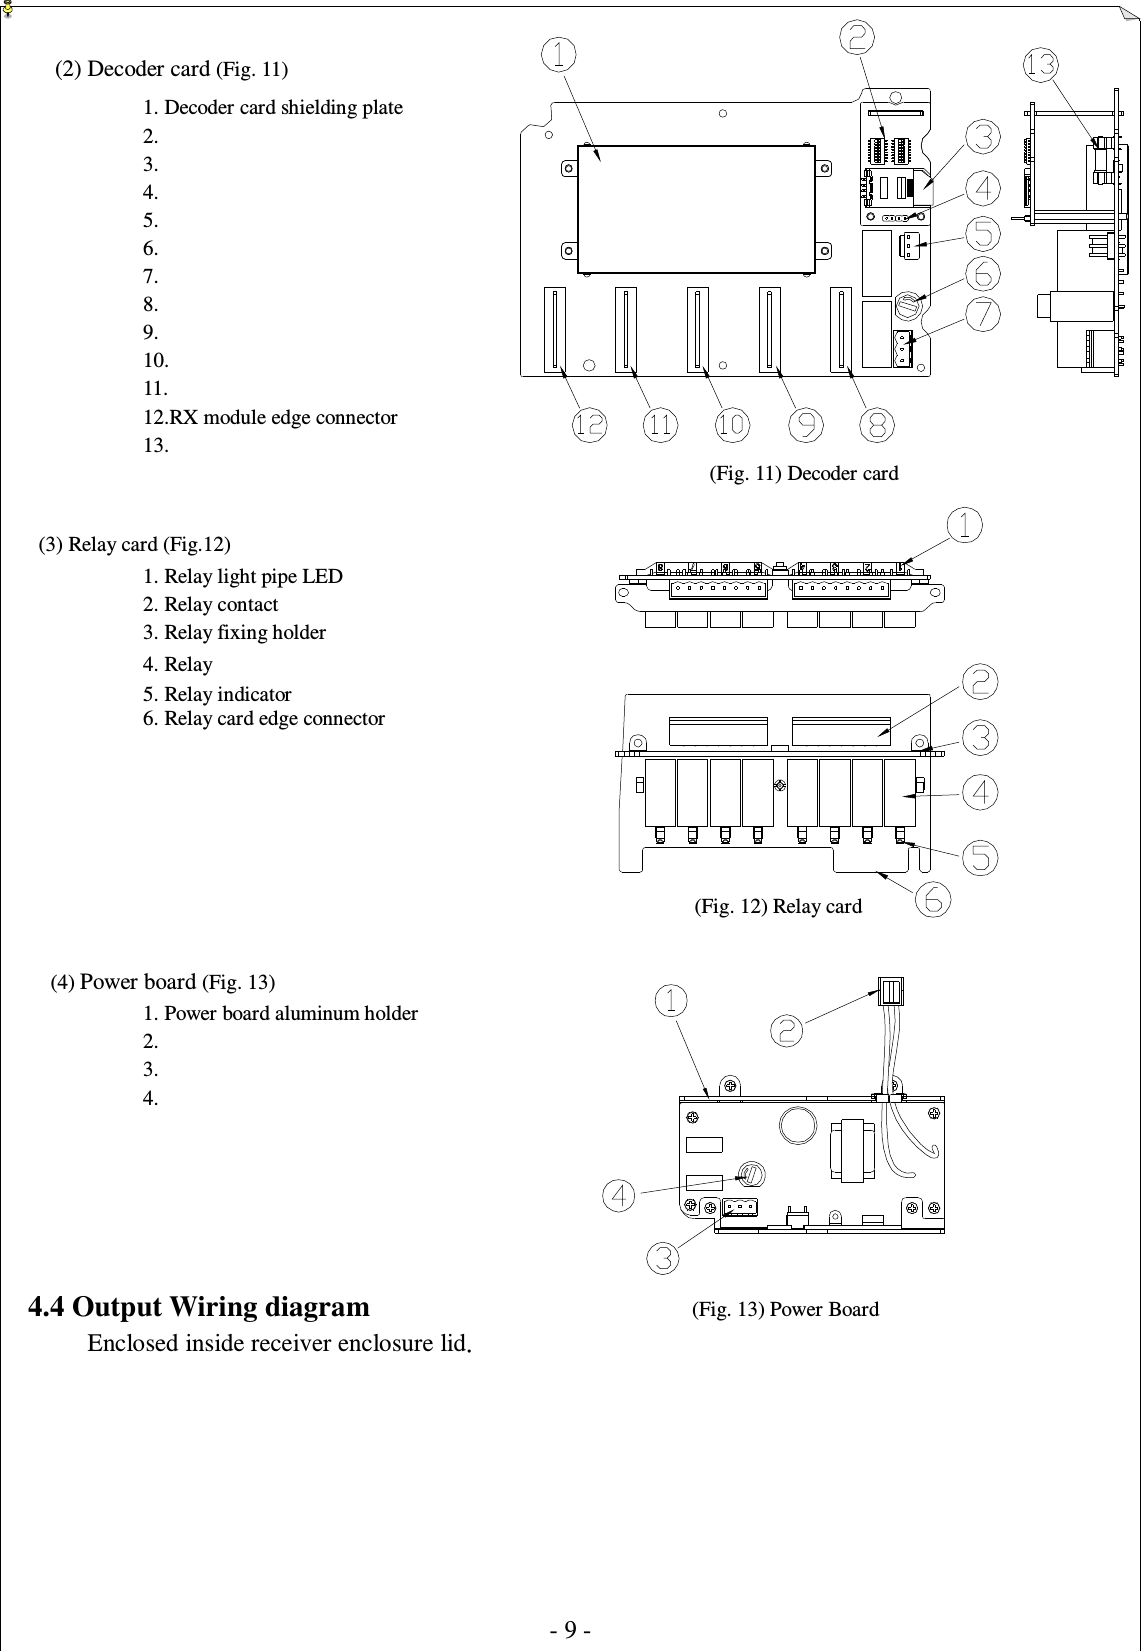  - 9 -  (2) Decoder card (Fig. 11)  1. Decoder card shielding plate 2.   3.   4.   5.   6.   7.   8.   9.   10.   11.   12.RX module edge connector 13.   (Fig. 11) Decoder card (3) Relay card (Fig.12)  1. Relay light pipe LED   2. Relay contact 3. Relay fixing holder 4. Relay   5. Relay indicator 6. Relay card edge connector (Fig. 12) Relay card (4) Power board (Fig. 13)  1. Power board aluminum holder 2.   3.   4.        4.4 Output Wiring diagram                                           (Fig. 13) Power Board Enclosed inside receiver enclosure lid  